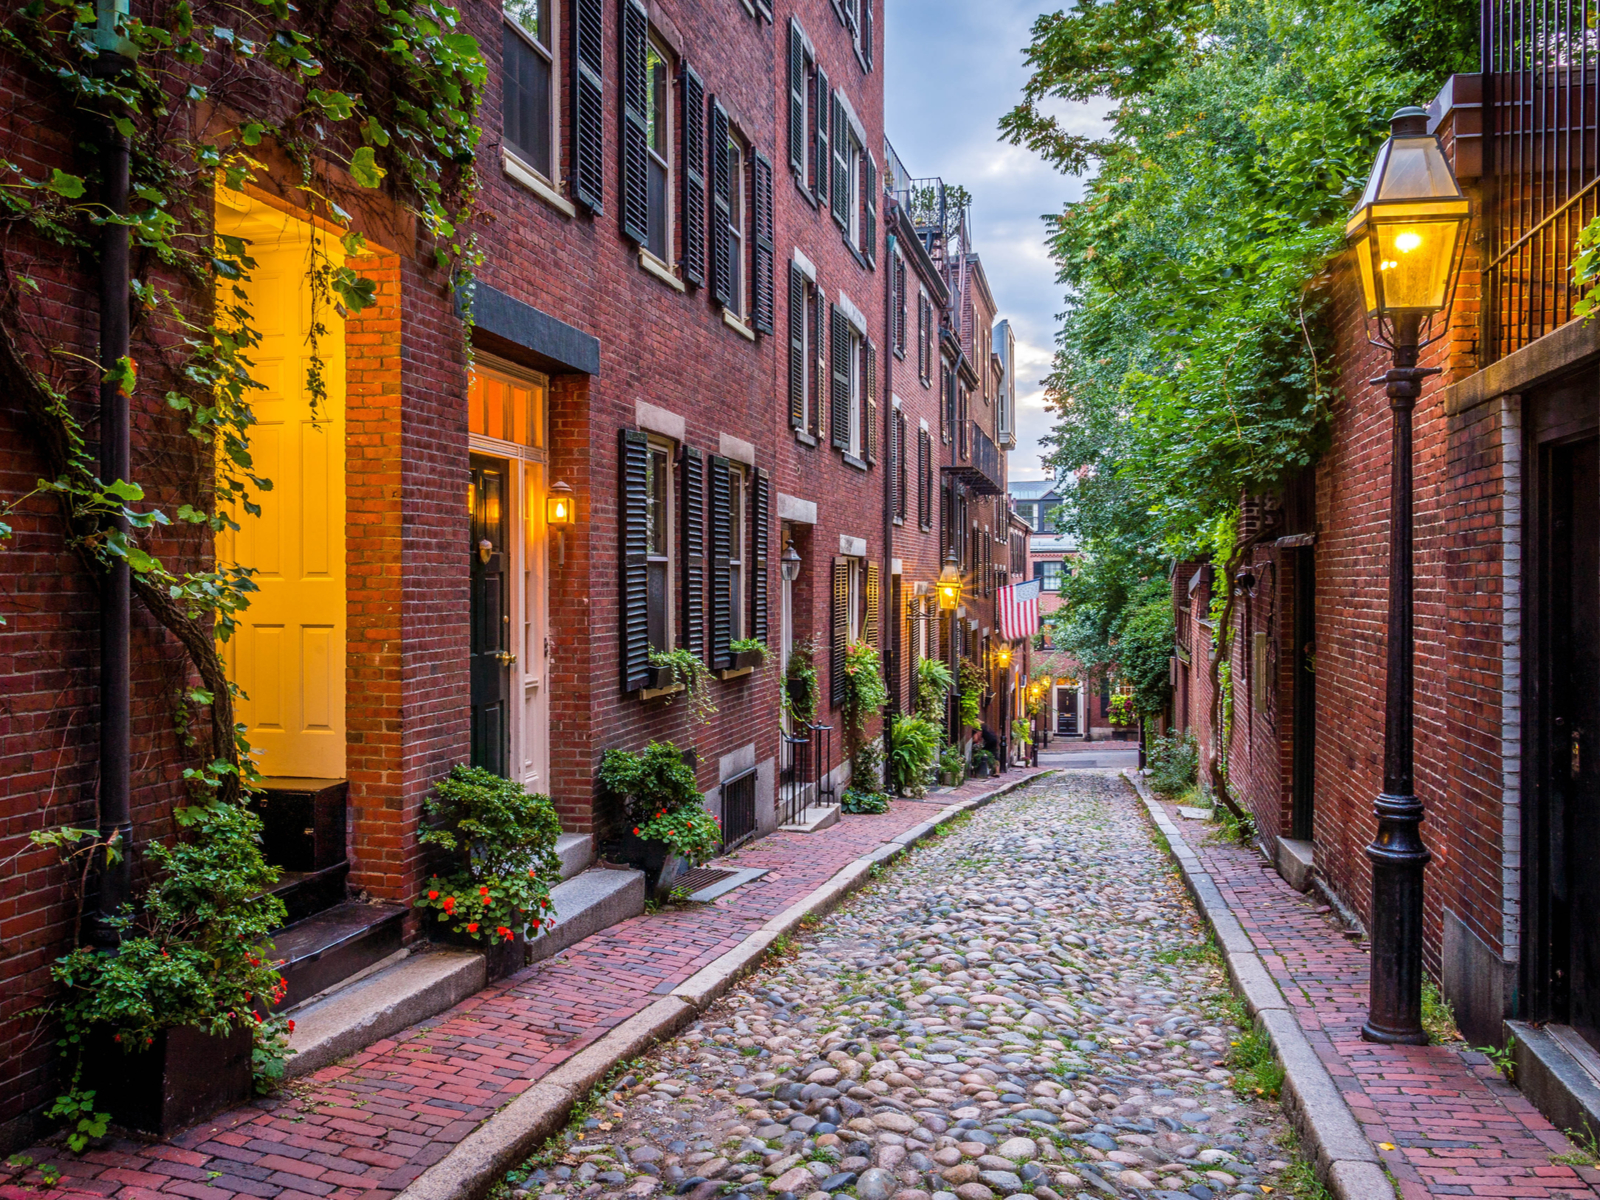 Acorn street as viewed from a walking path for a piece on the best hotels in Boston